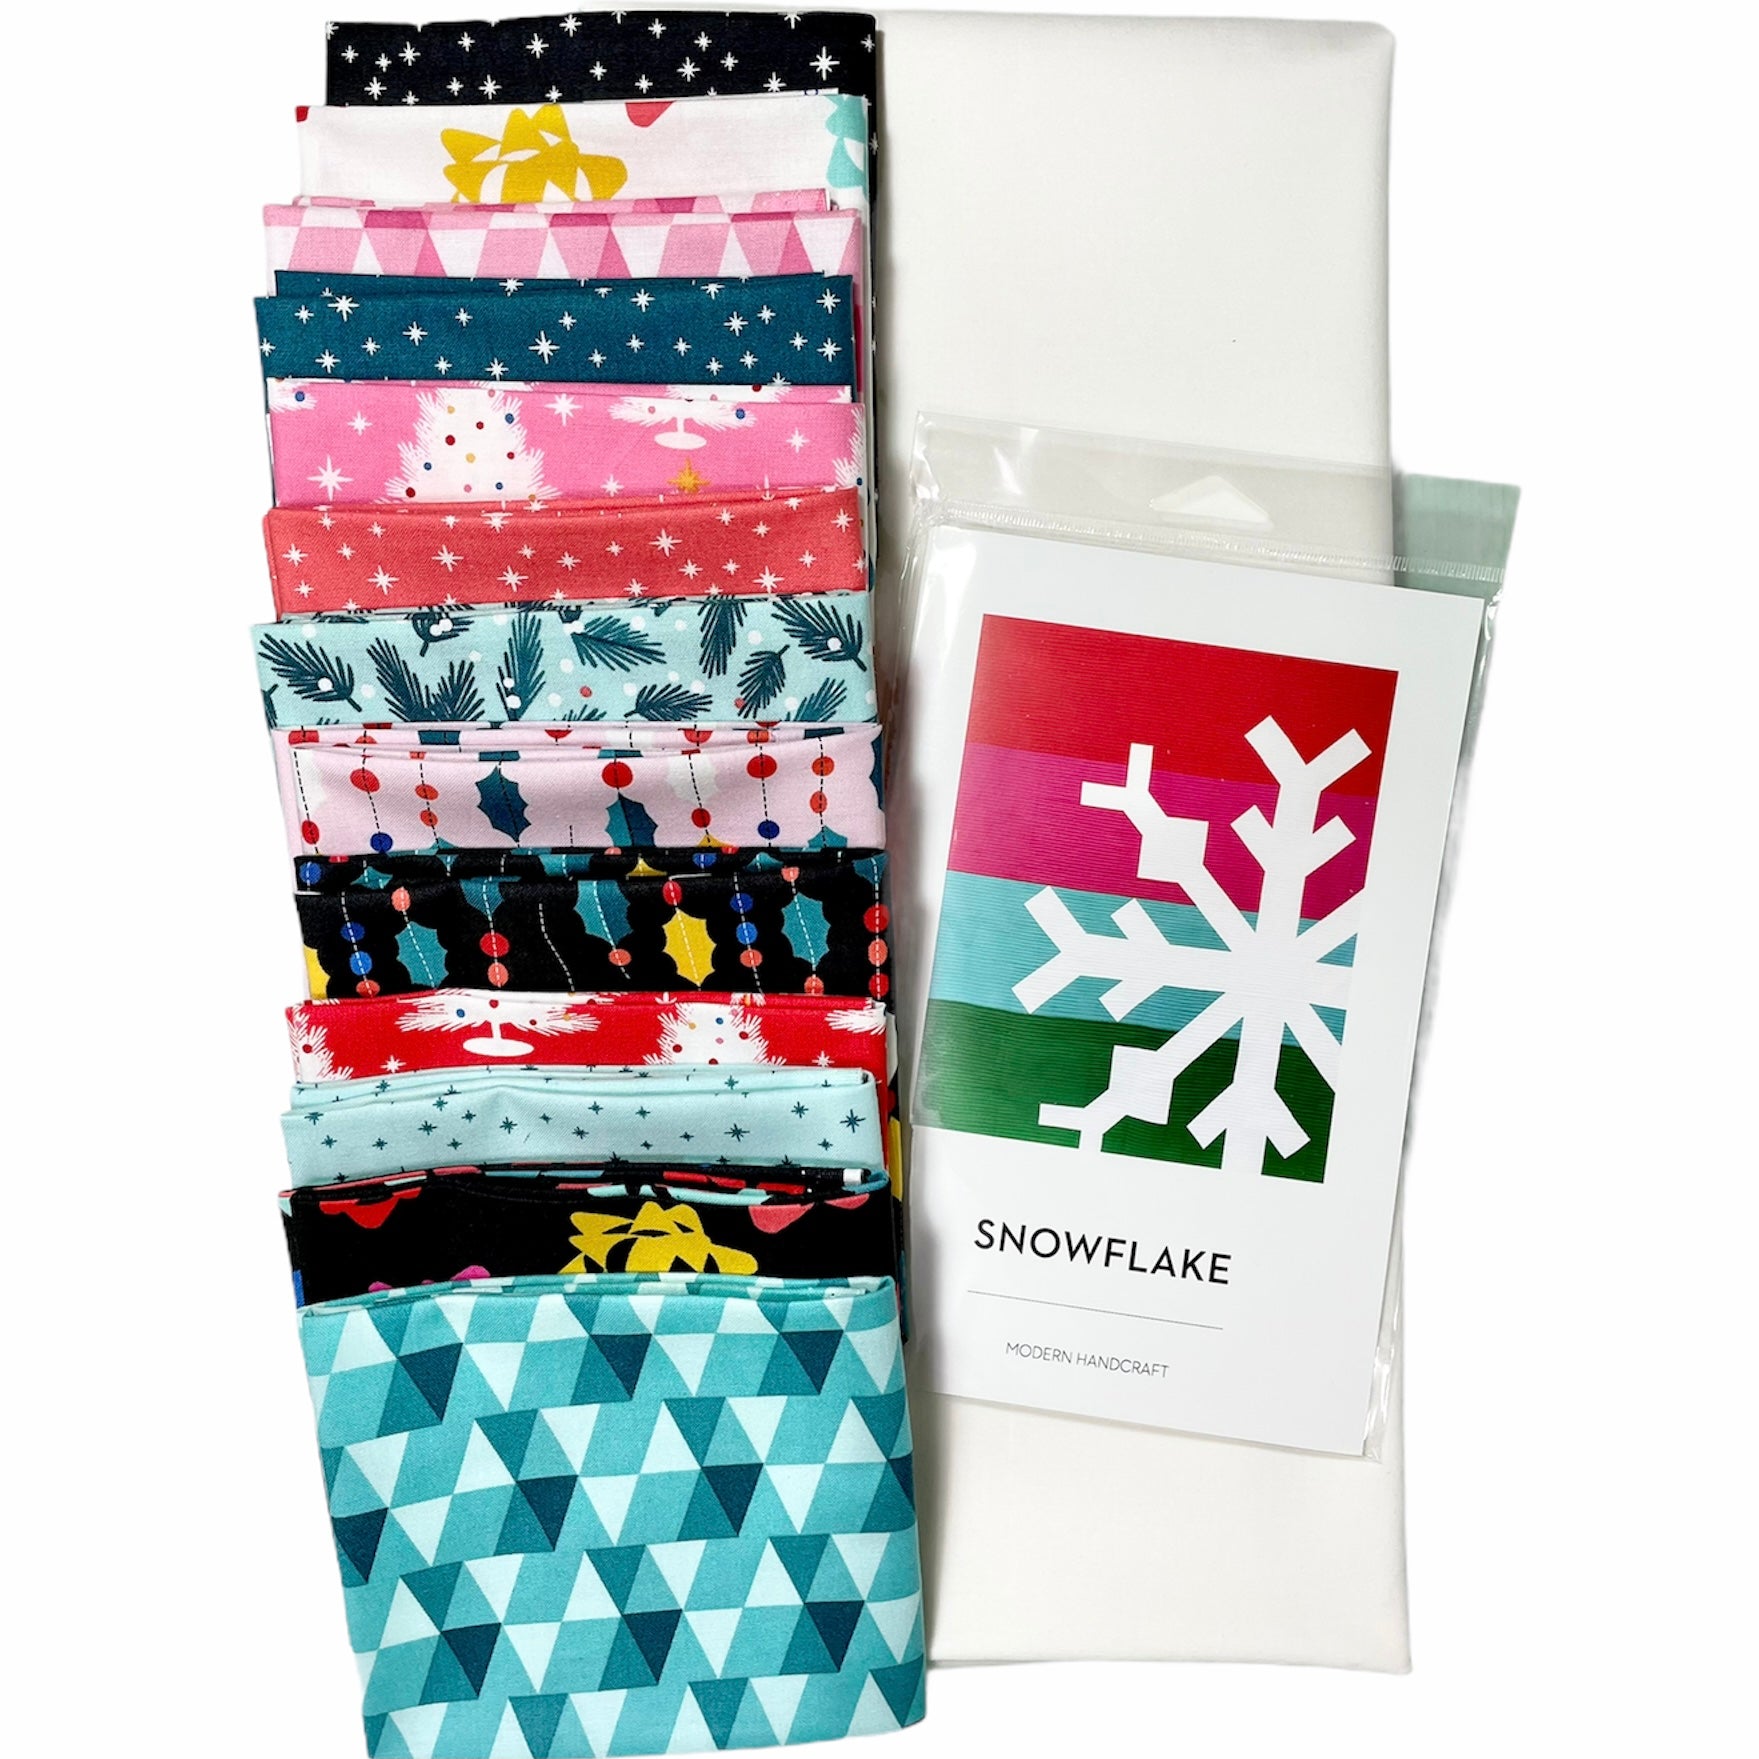 Snowflake quilt kit with Peppermint by FIGO